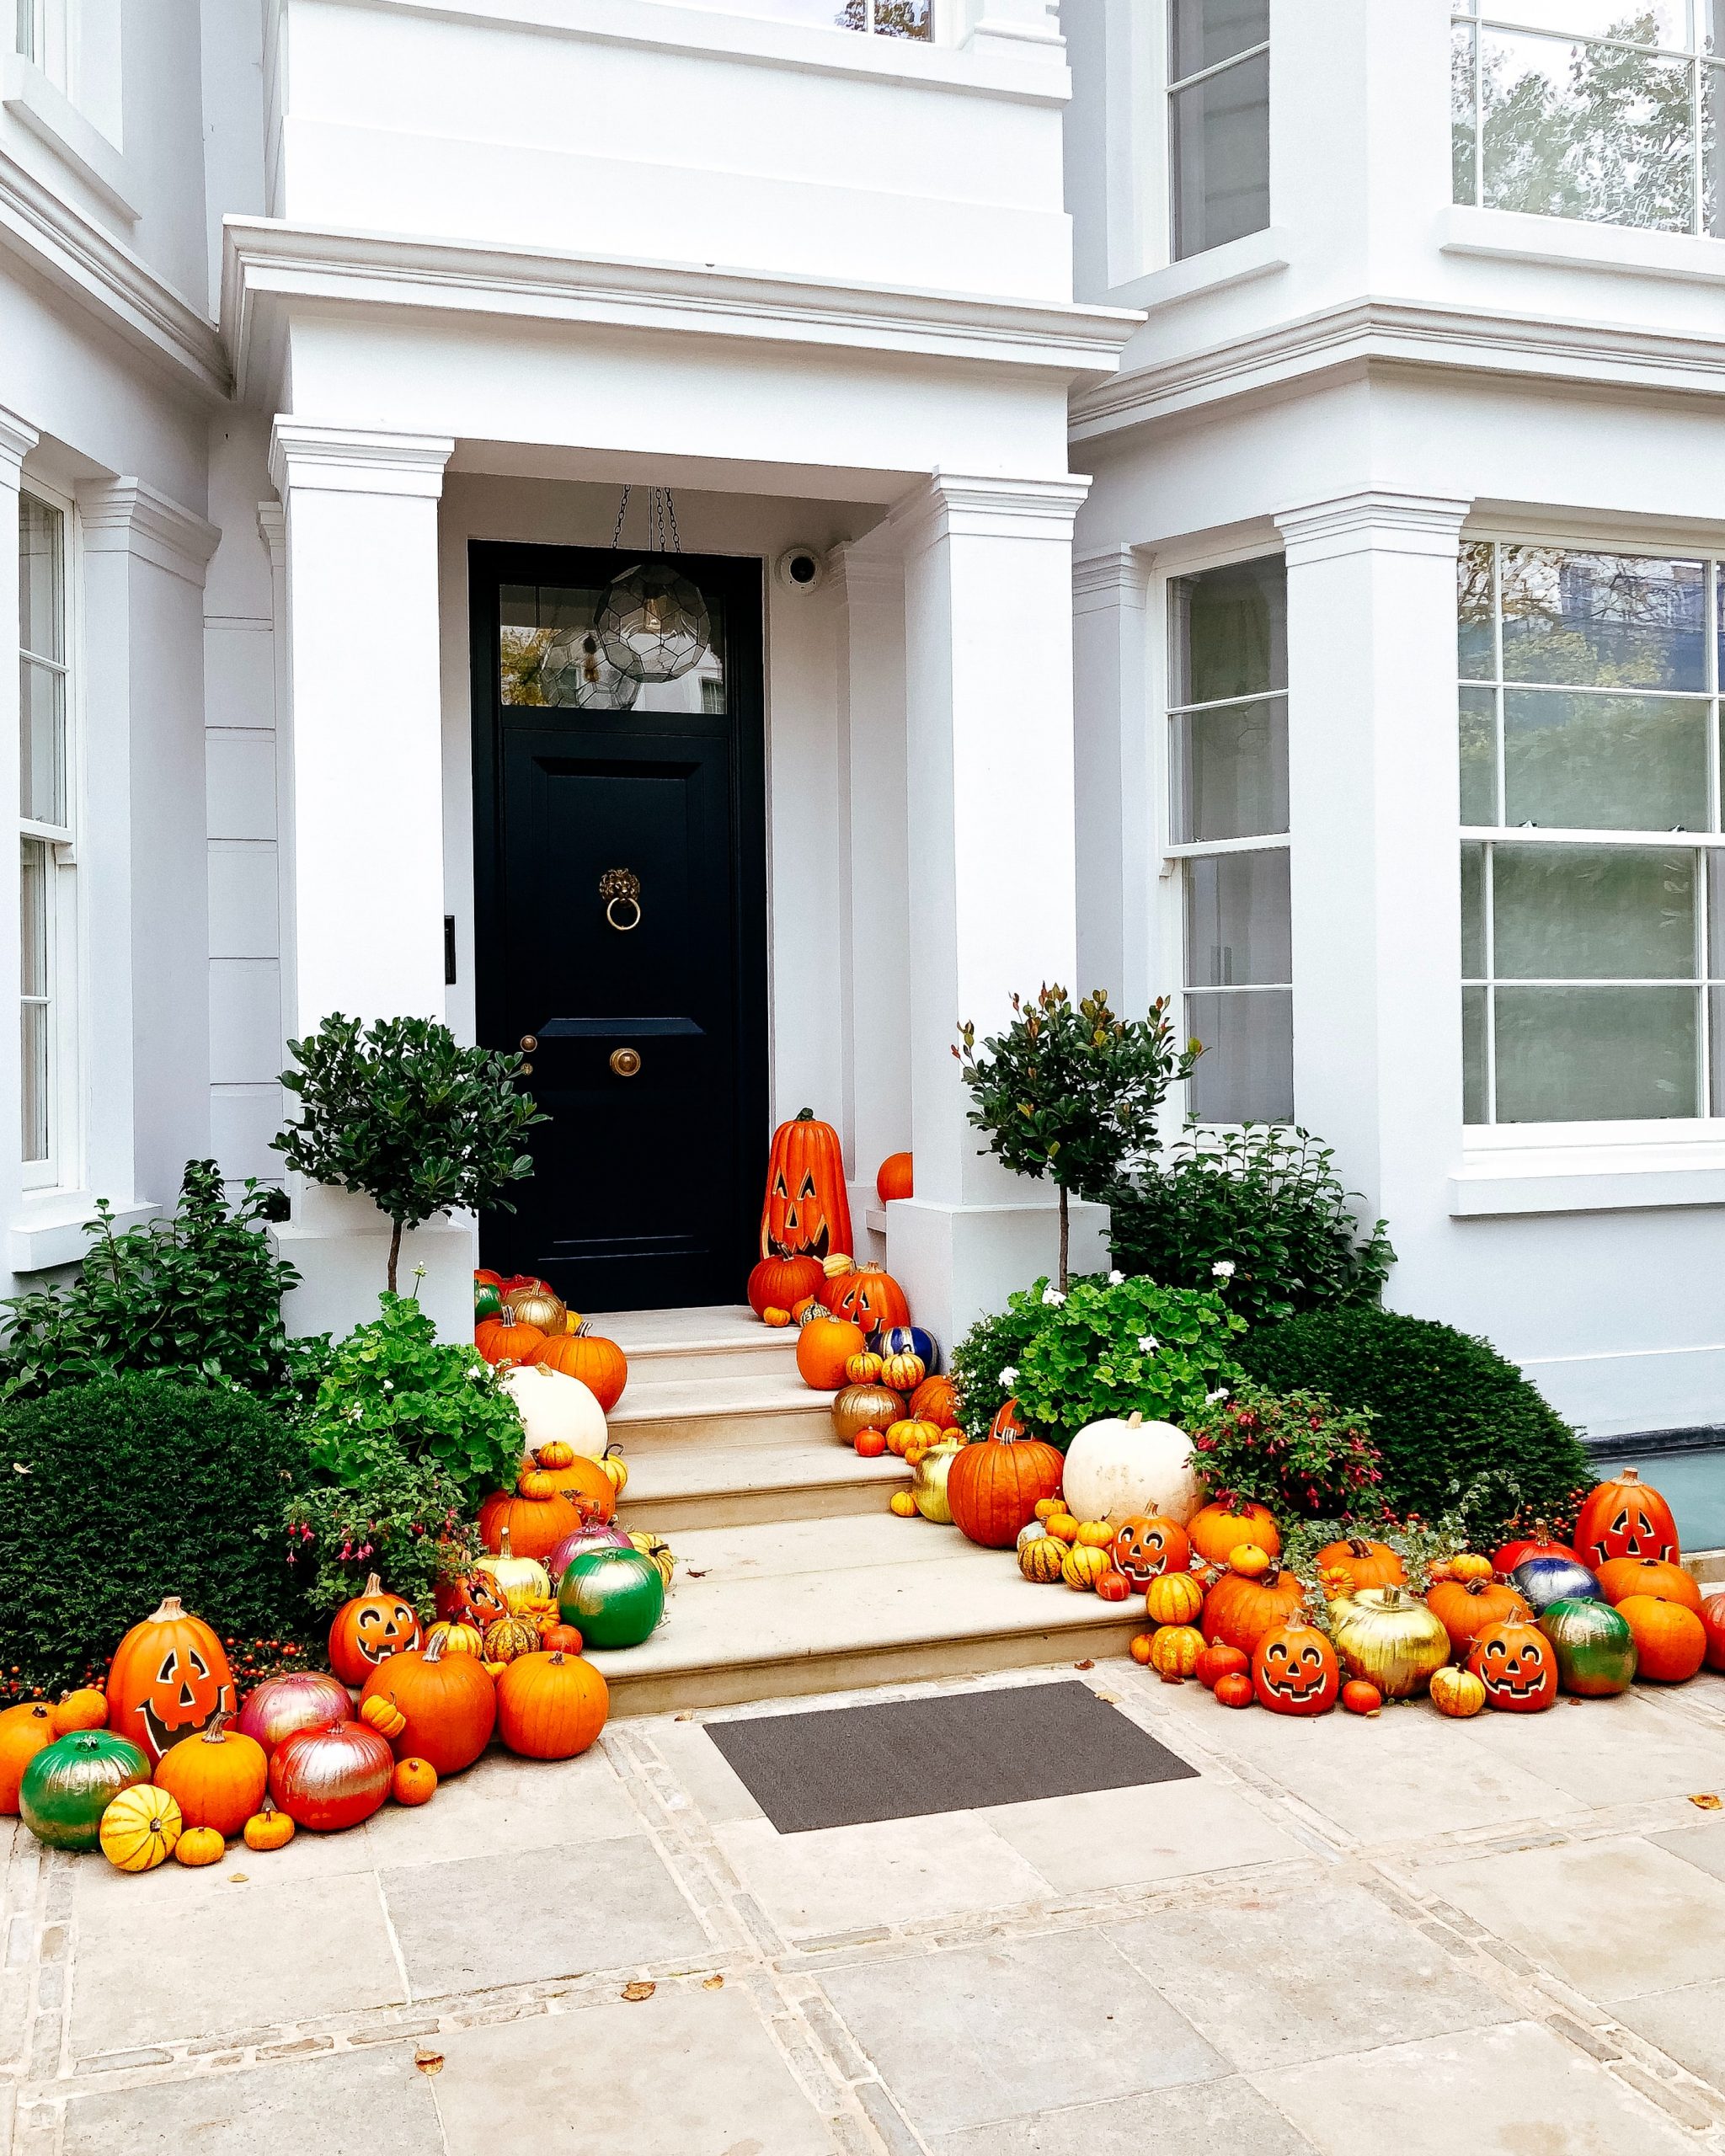 How to decorate your home for Halloween? Inspirations